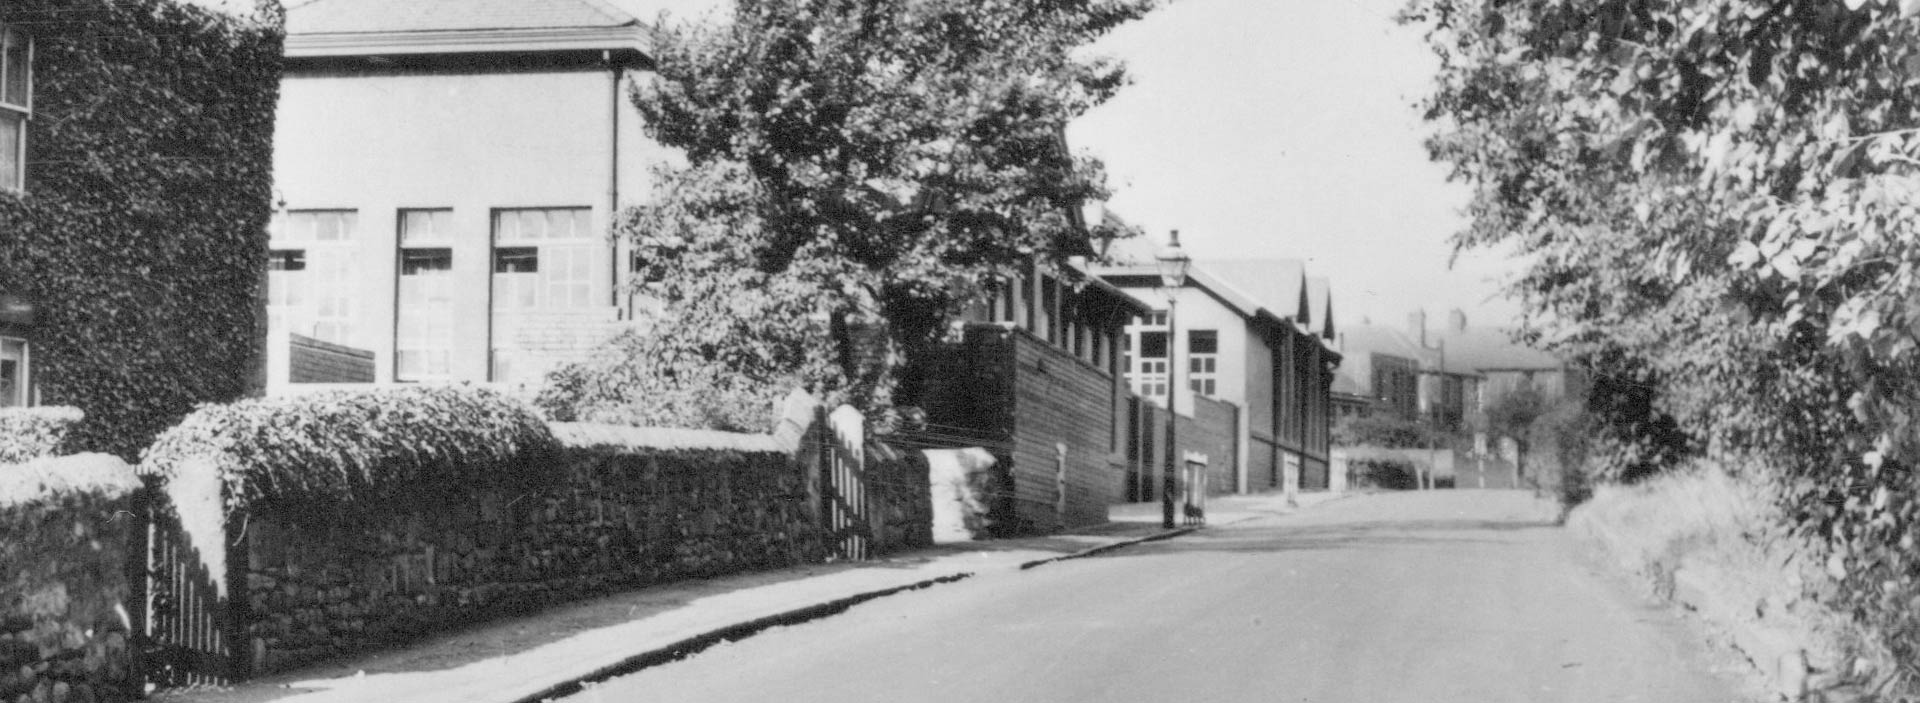 image looking up The Green road towards Walbottle Primary School